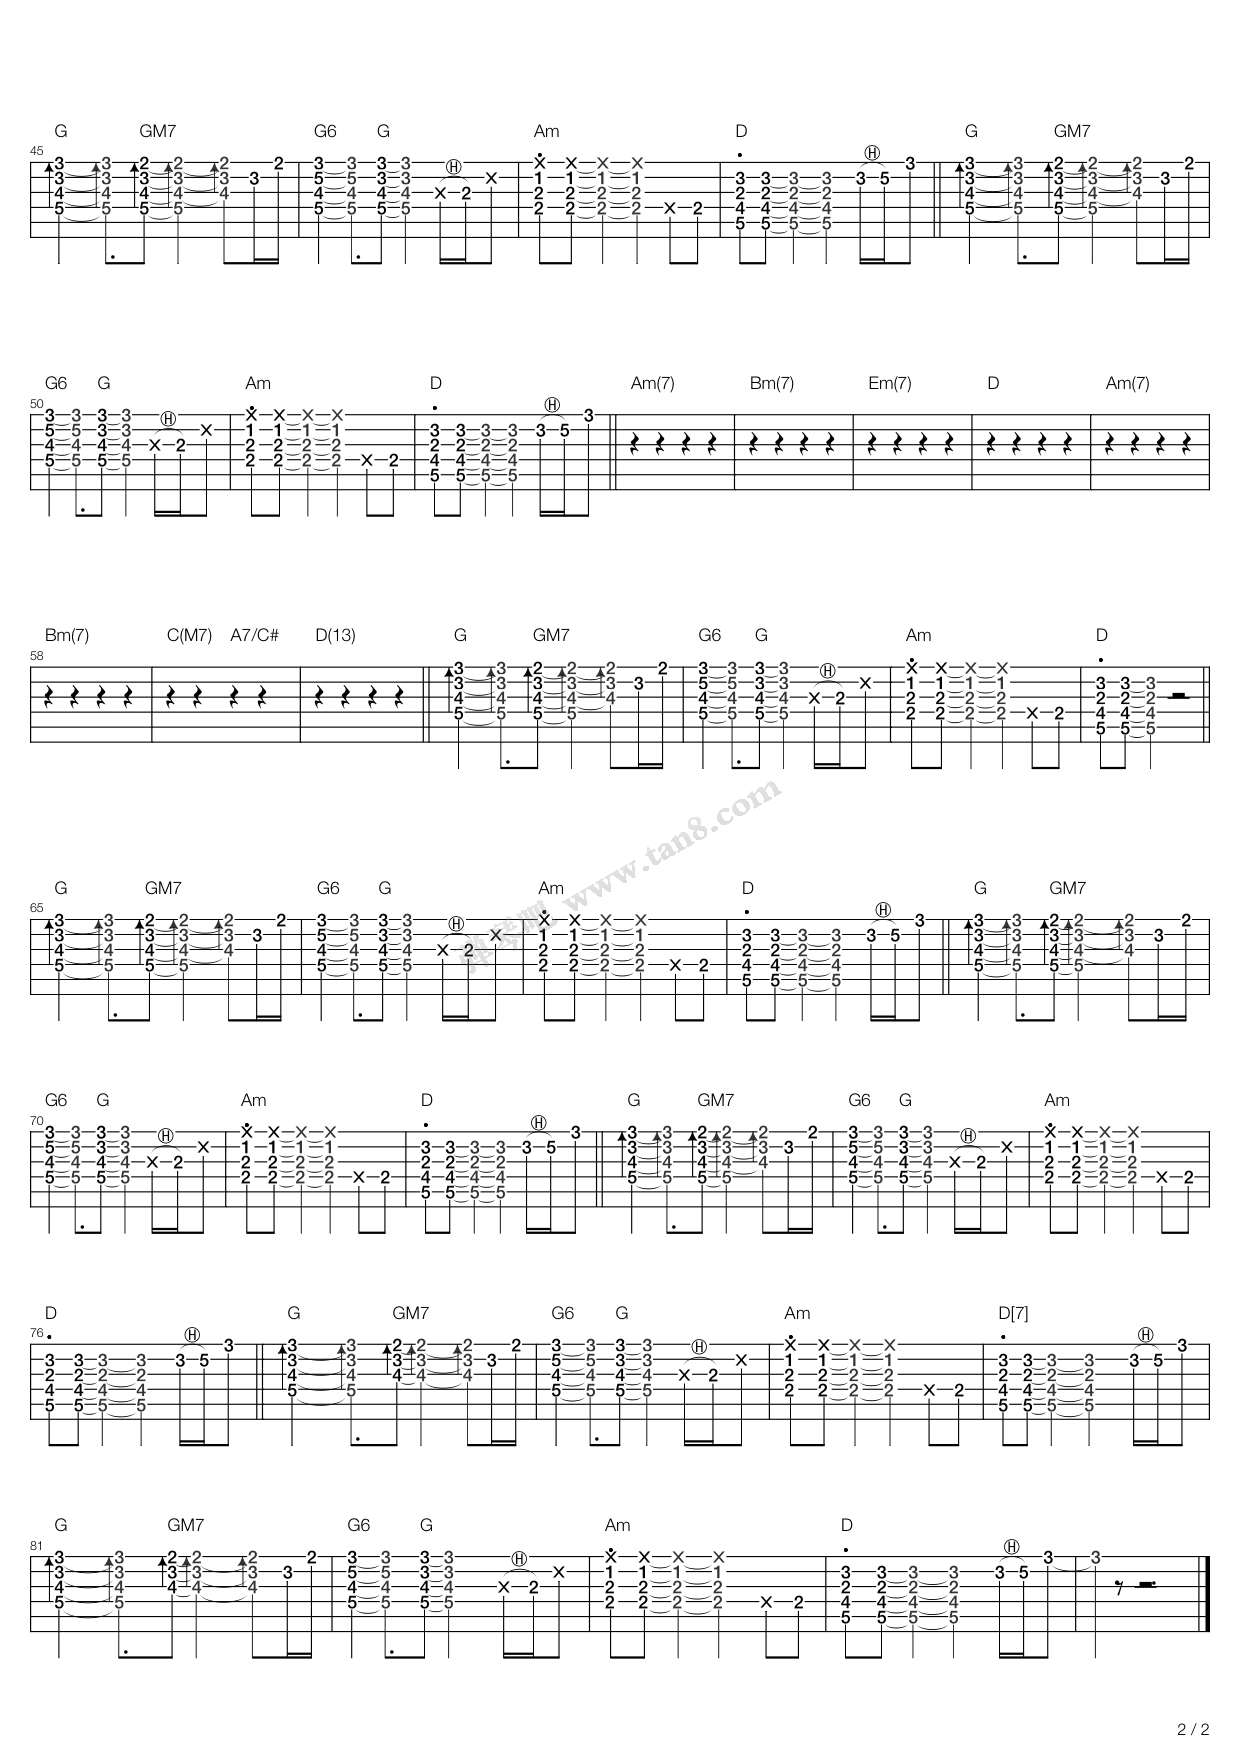 Die In Your Arms by Justin Bieber Guitar Tabs Chords Notes Sheet Music Free